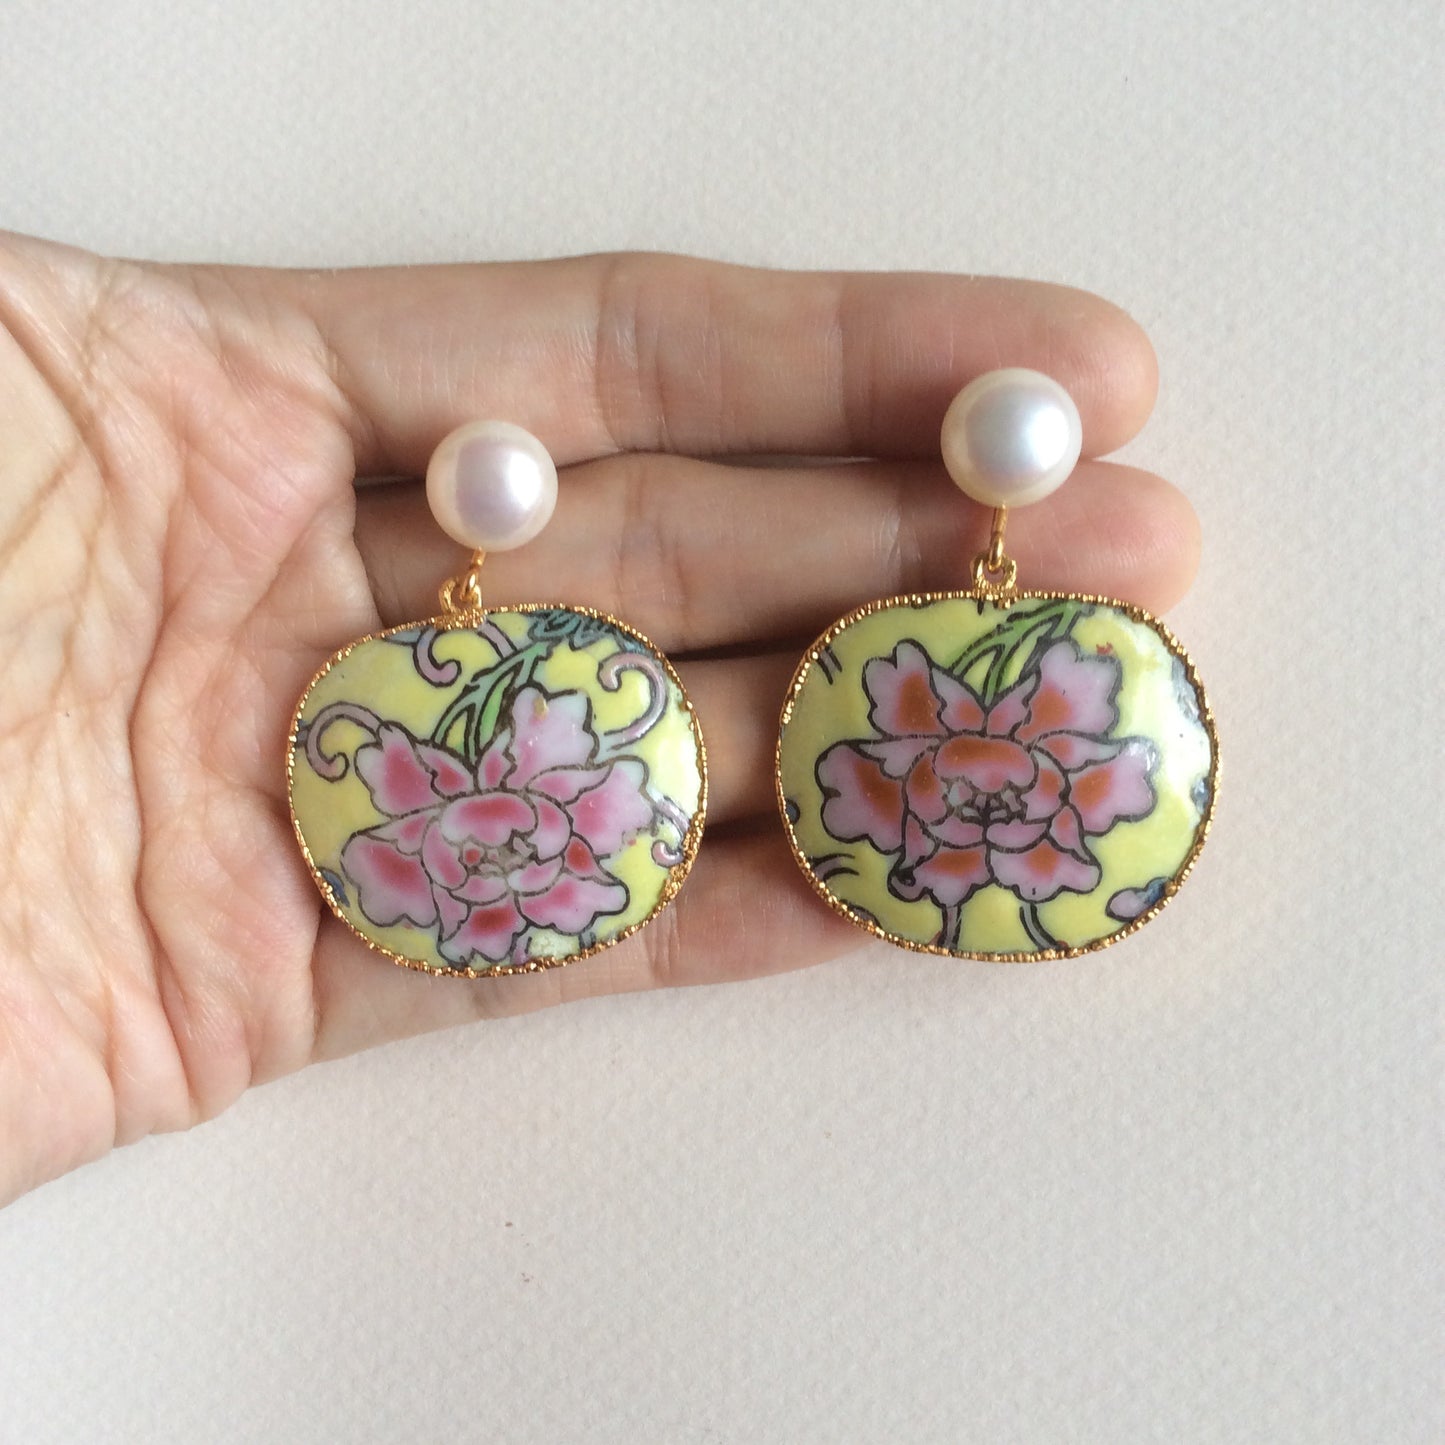 Imperial yellow peony porcelain earrings with freshwater pearl studs